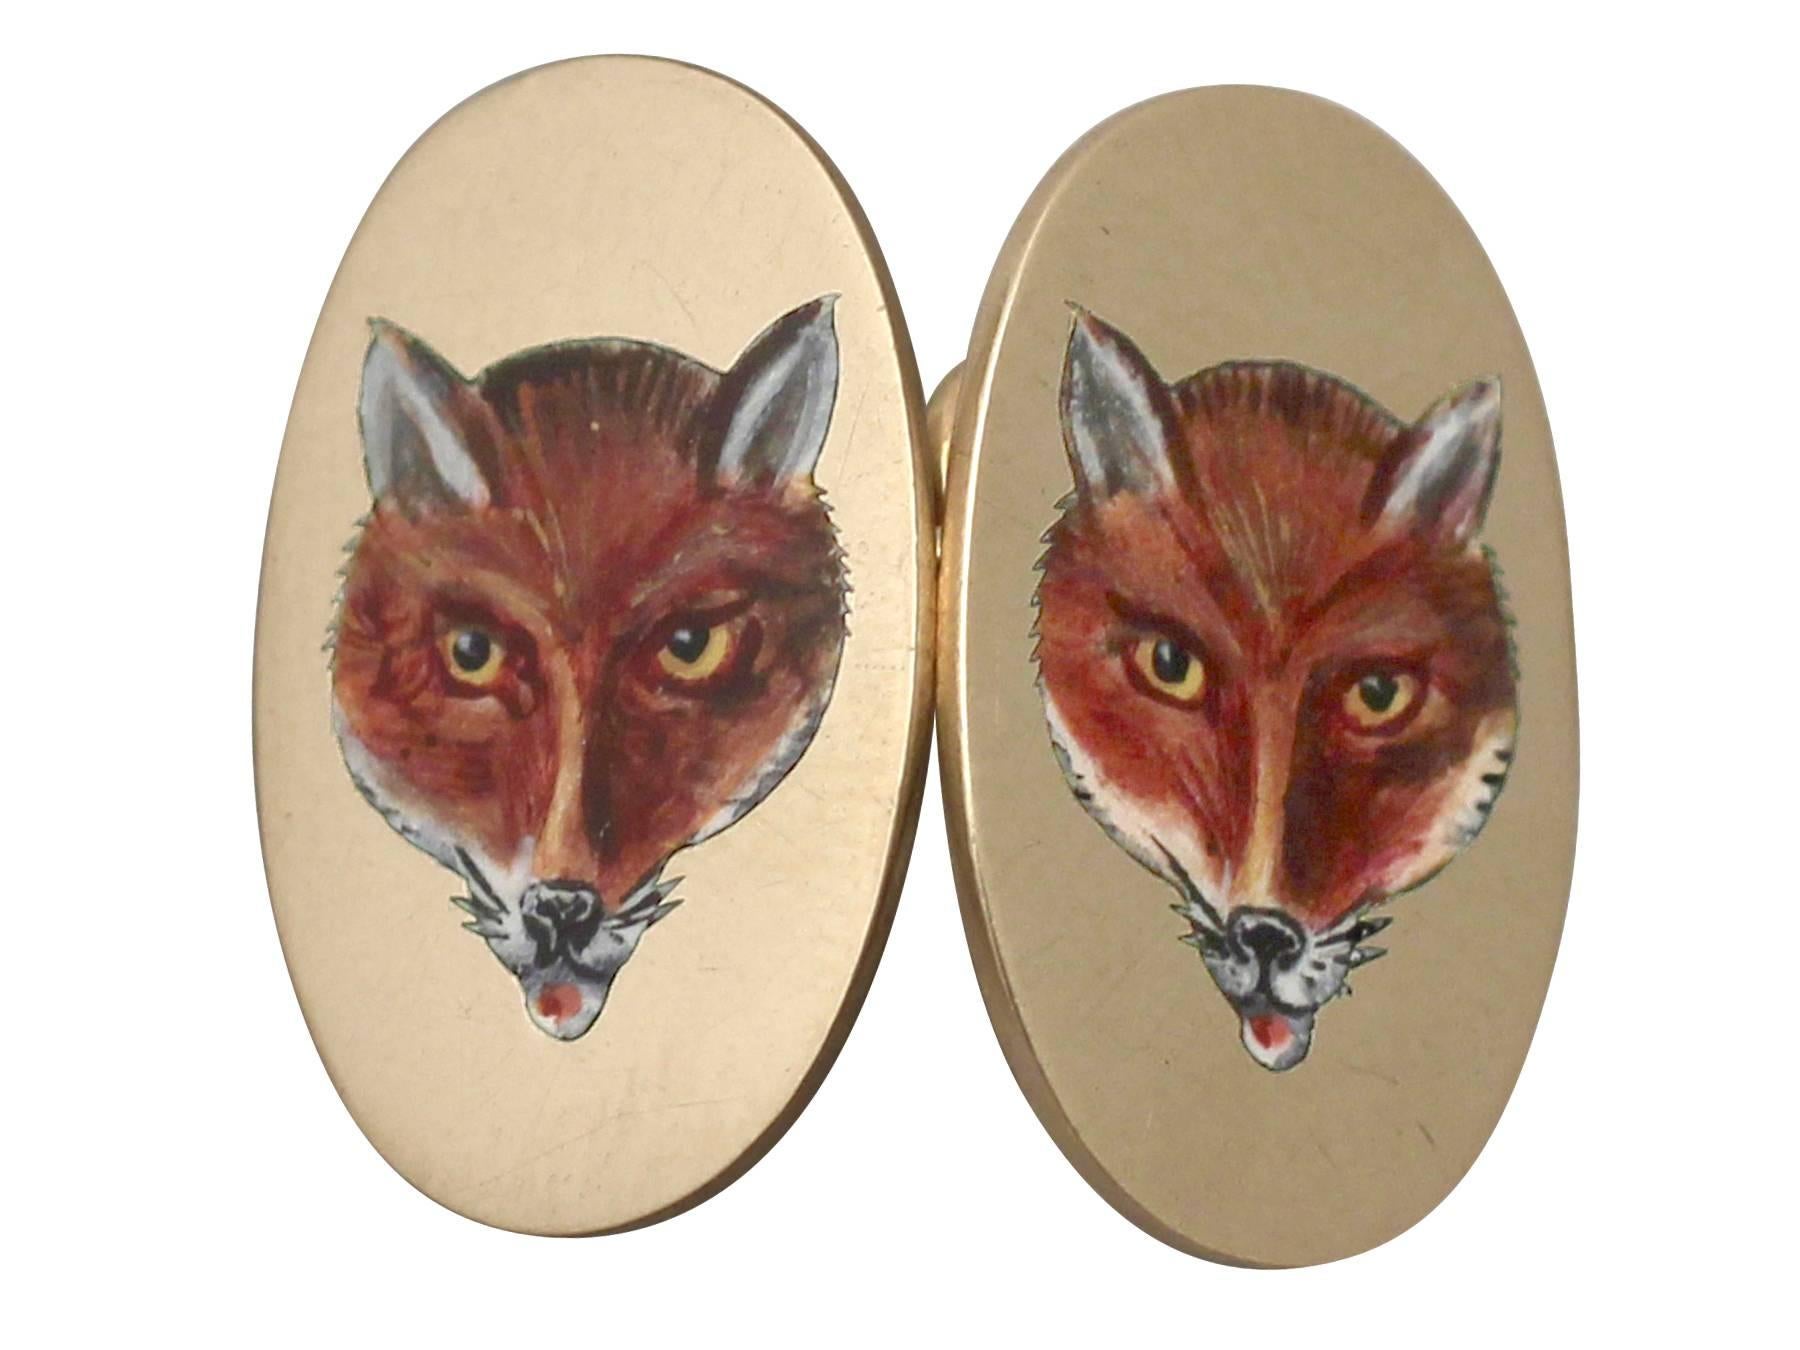 A stunning pair of enamel and 9 karat yellow gold cufflinks depicting fox's heads; part of our diverse antique jewelry and estate jewelry collections

These fine and impressive vintage fox cufflinks have been crafted in 9k yellow gold.

The links